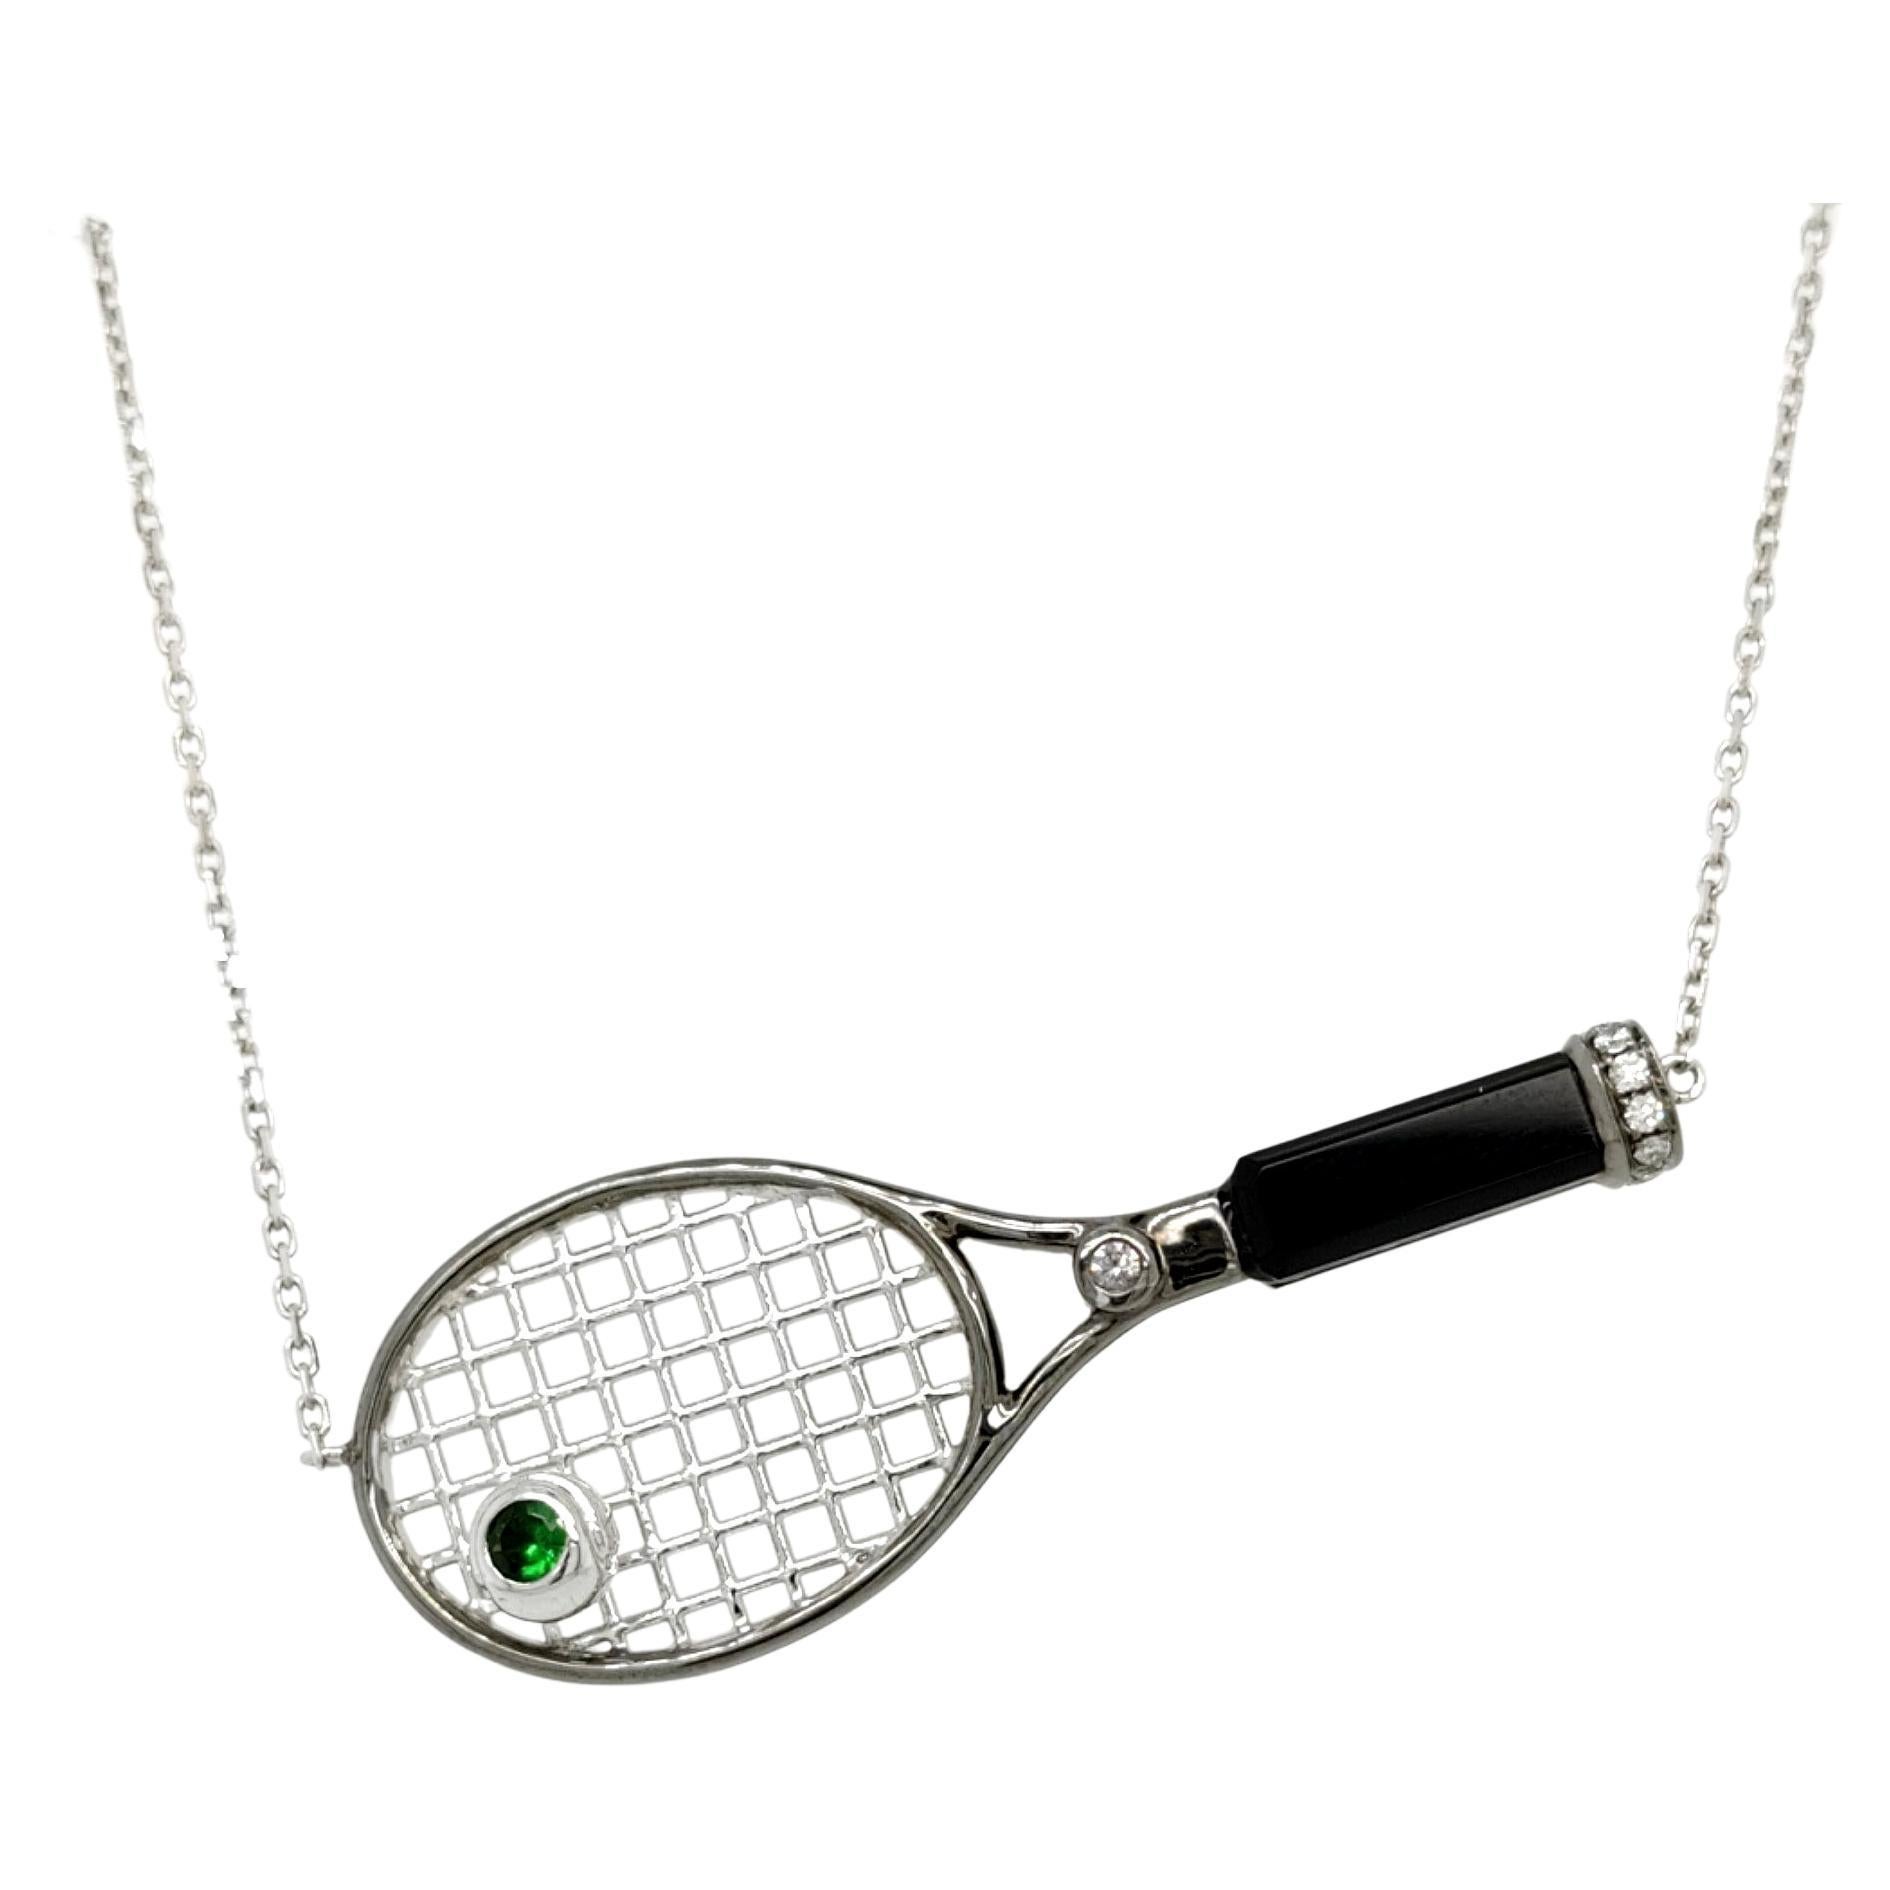 18K White Gold Tennis Racket Diamond Pendant Necklace with Green Garnet and Onyx For Sale